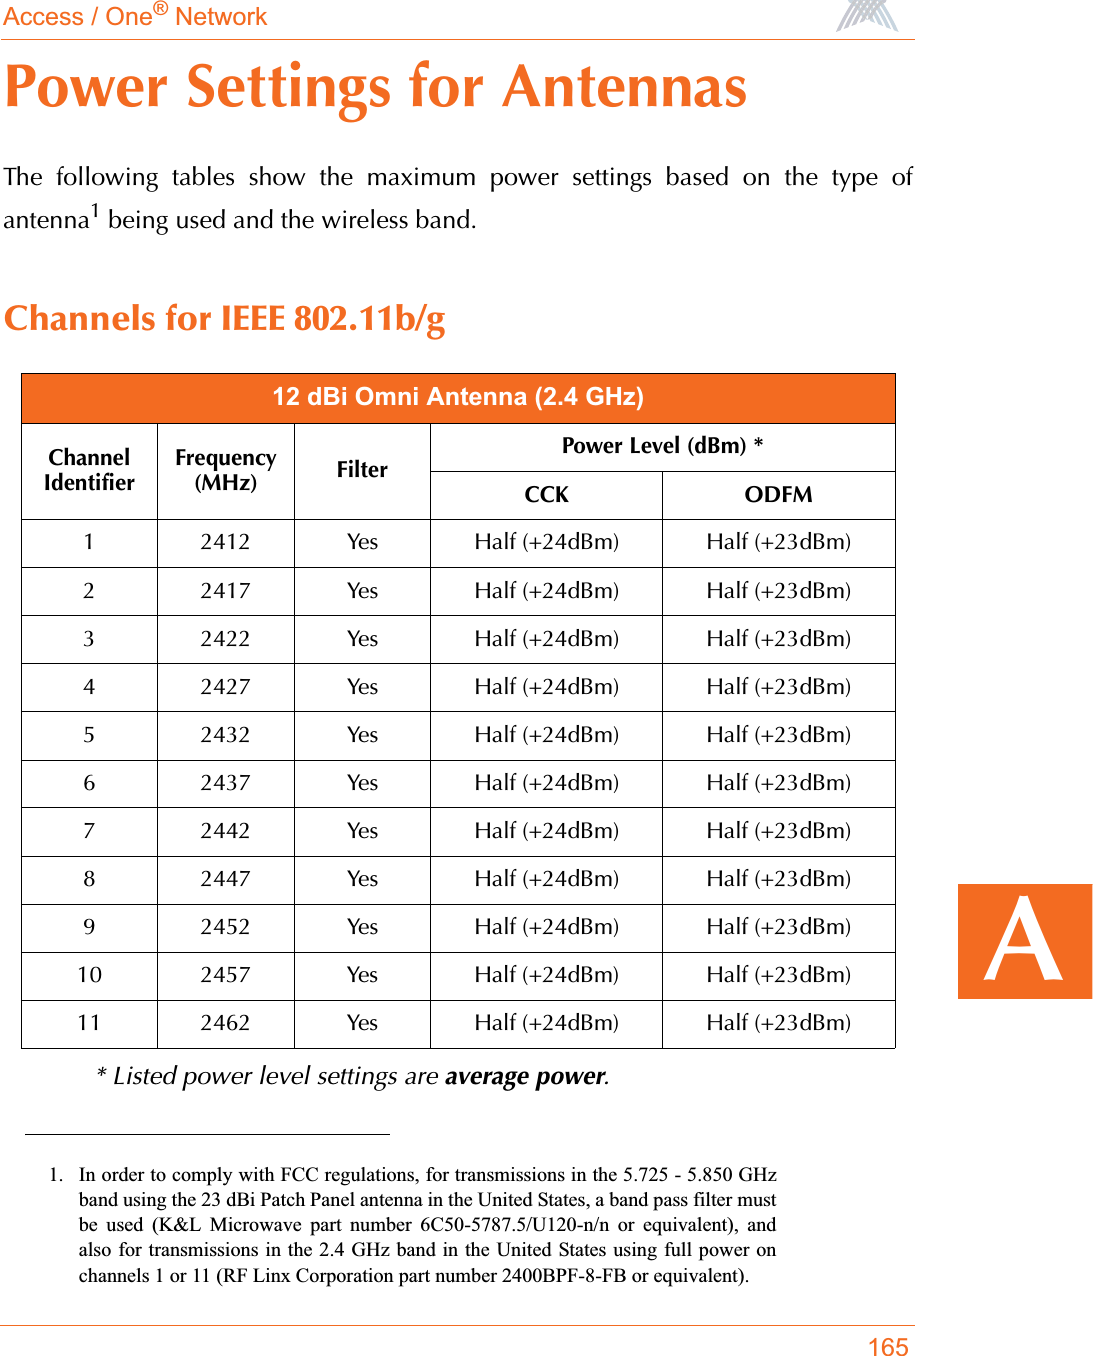 Access / One® Network165APower Settings for AntennasThe following tables show the maximum power settings based on the type ofantenna1 being used and the wireless band.Channels for IEEE 802.11b/g* Listed power level settings are average power.1. In order to comply with FCC regulations, for transmissions in the 5.725 - 5.850 GHzband using the 23 dBi Patch Panel antenna in the United States, a band pass filter mustbe used (K&amp;L Microwave part number 6C50-5787.5/U120-n/n or equivalent), andalso for transmissions in the 2.4 GHz band in the United States using full power onchannels 1 or 11 (RF Linx Corporation part number 2400BPF-8-FB or equivalent).12 dBi Omni Antenna (2.4 GHz)ChannelIdentifierFrequency (MHz) FilterPower Level (dBm) *CCK ODFM1 2412 Yes Half (+24dBm) Half (+23dBm)2 2417 Yes Half (+24dBm) Half (+23dBm)3 2422 Yes Half (+24dBm) Half (+23dBm)4 2427 Yes Half (+24dBm) Half (+23dBm)5 2432 Yes Half (+24dBm) Half (+23dBm)6 2437 Yes Half (+24dBm) Half (+23dBm)7 2442 Yes Half (+24dBm) Half (+23dBm)8 2447 Yes Half (+24dBm) Half (+23dBm)9 2452 Yes Half (+24dBm) Half (+23dBm)10 2457 Yes Half (+24dBm) Half (+23dBm)11 2462 Yes Half (+24dBm) Half (+23dBm)